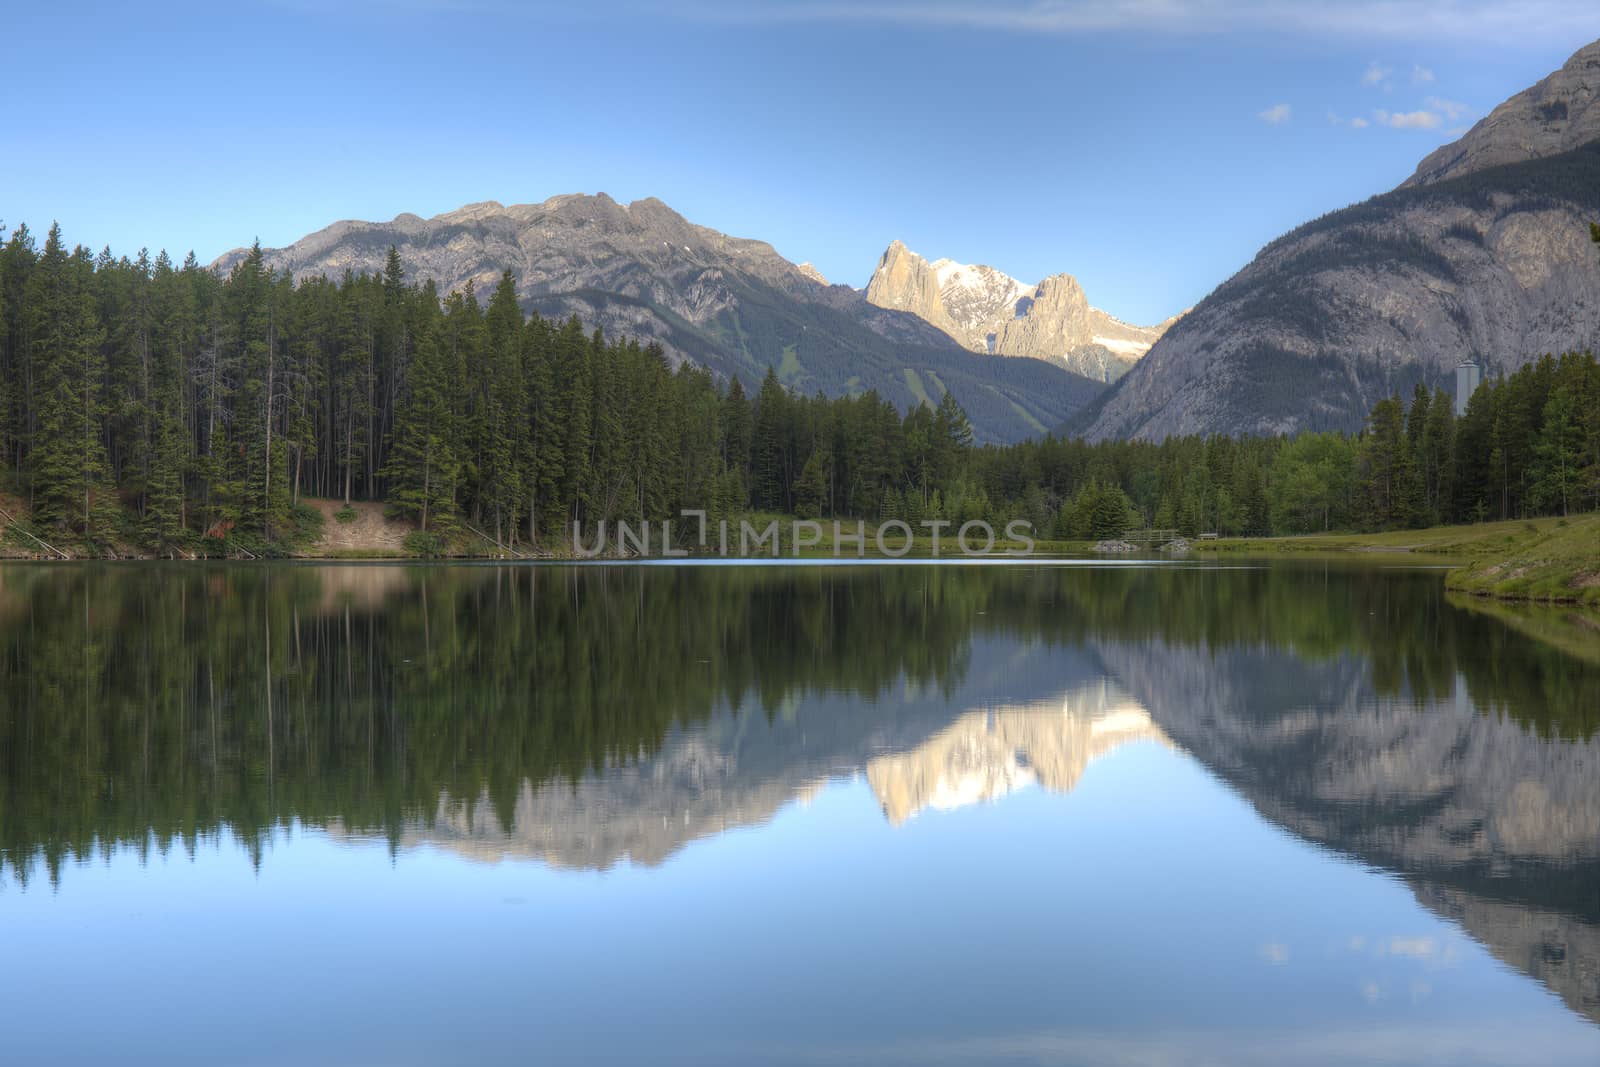 Mountains and Trees Reflecting in a Lake - Banff, Canada by gonepaddling